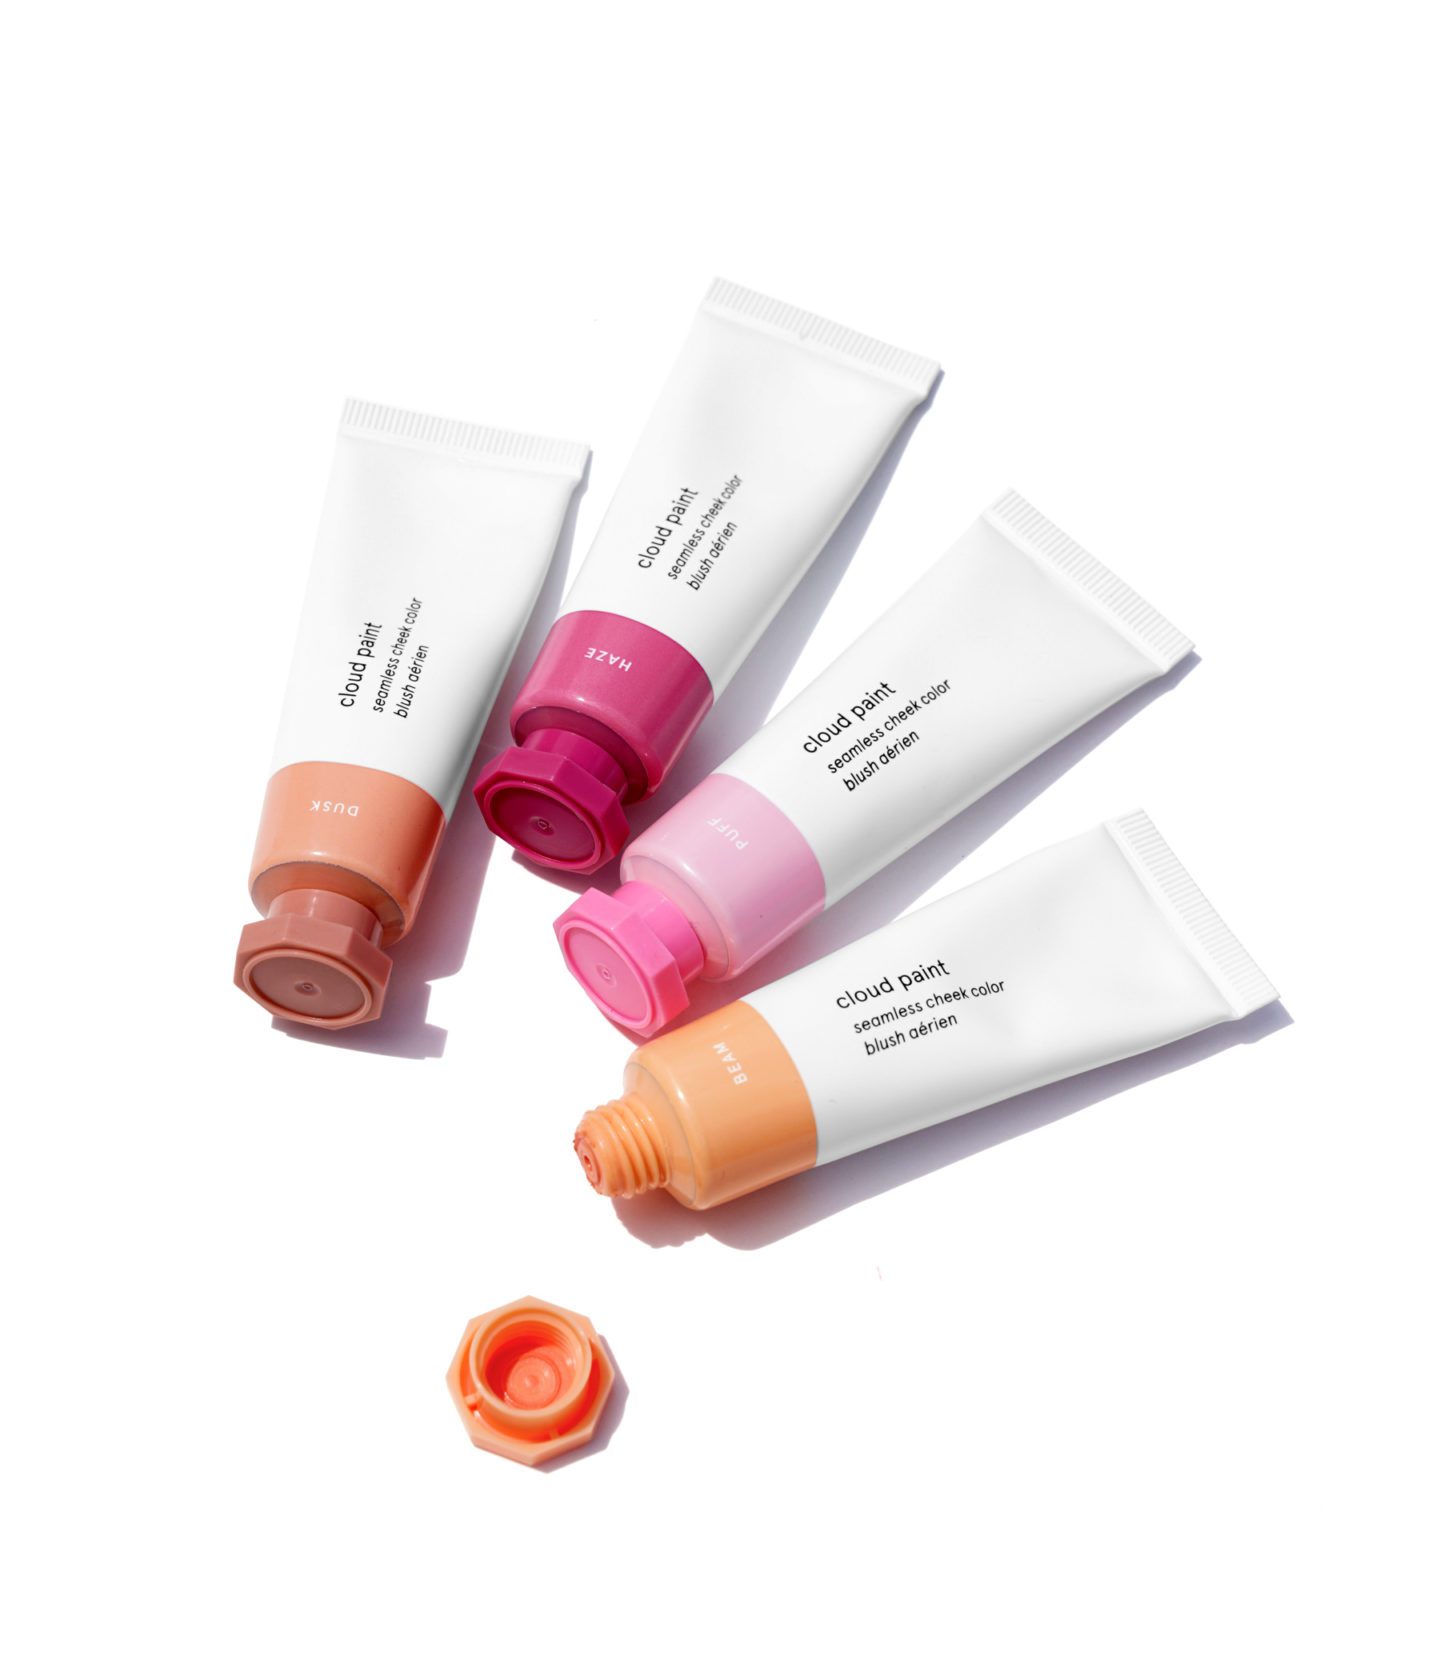 Glossier Cloud Paint Review and Swatches | The Beauty Look Book